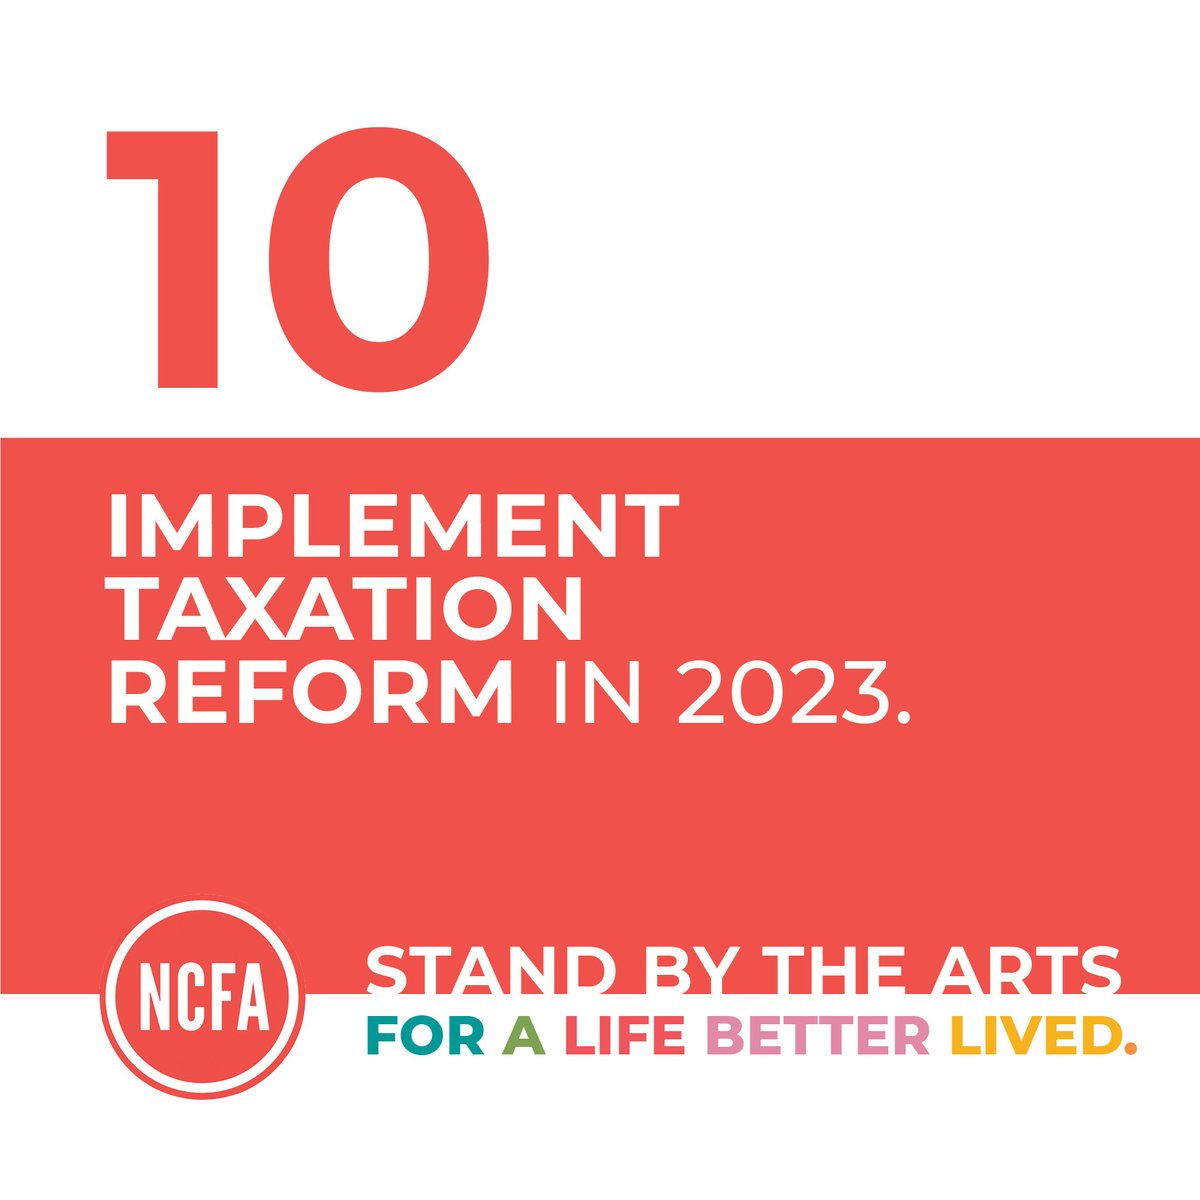 10. Implement Taxation Reform: Our submission to the Commission on Taxation and Welfare focused on areas that could be easily changed and would have a real and lasting effect for the arts sector. #StandByTheArts in #Budget2023